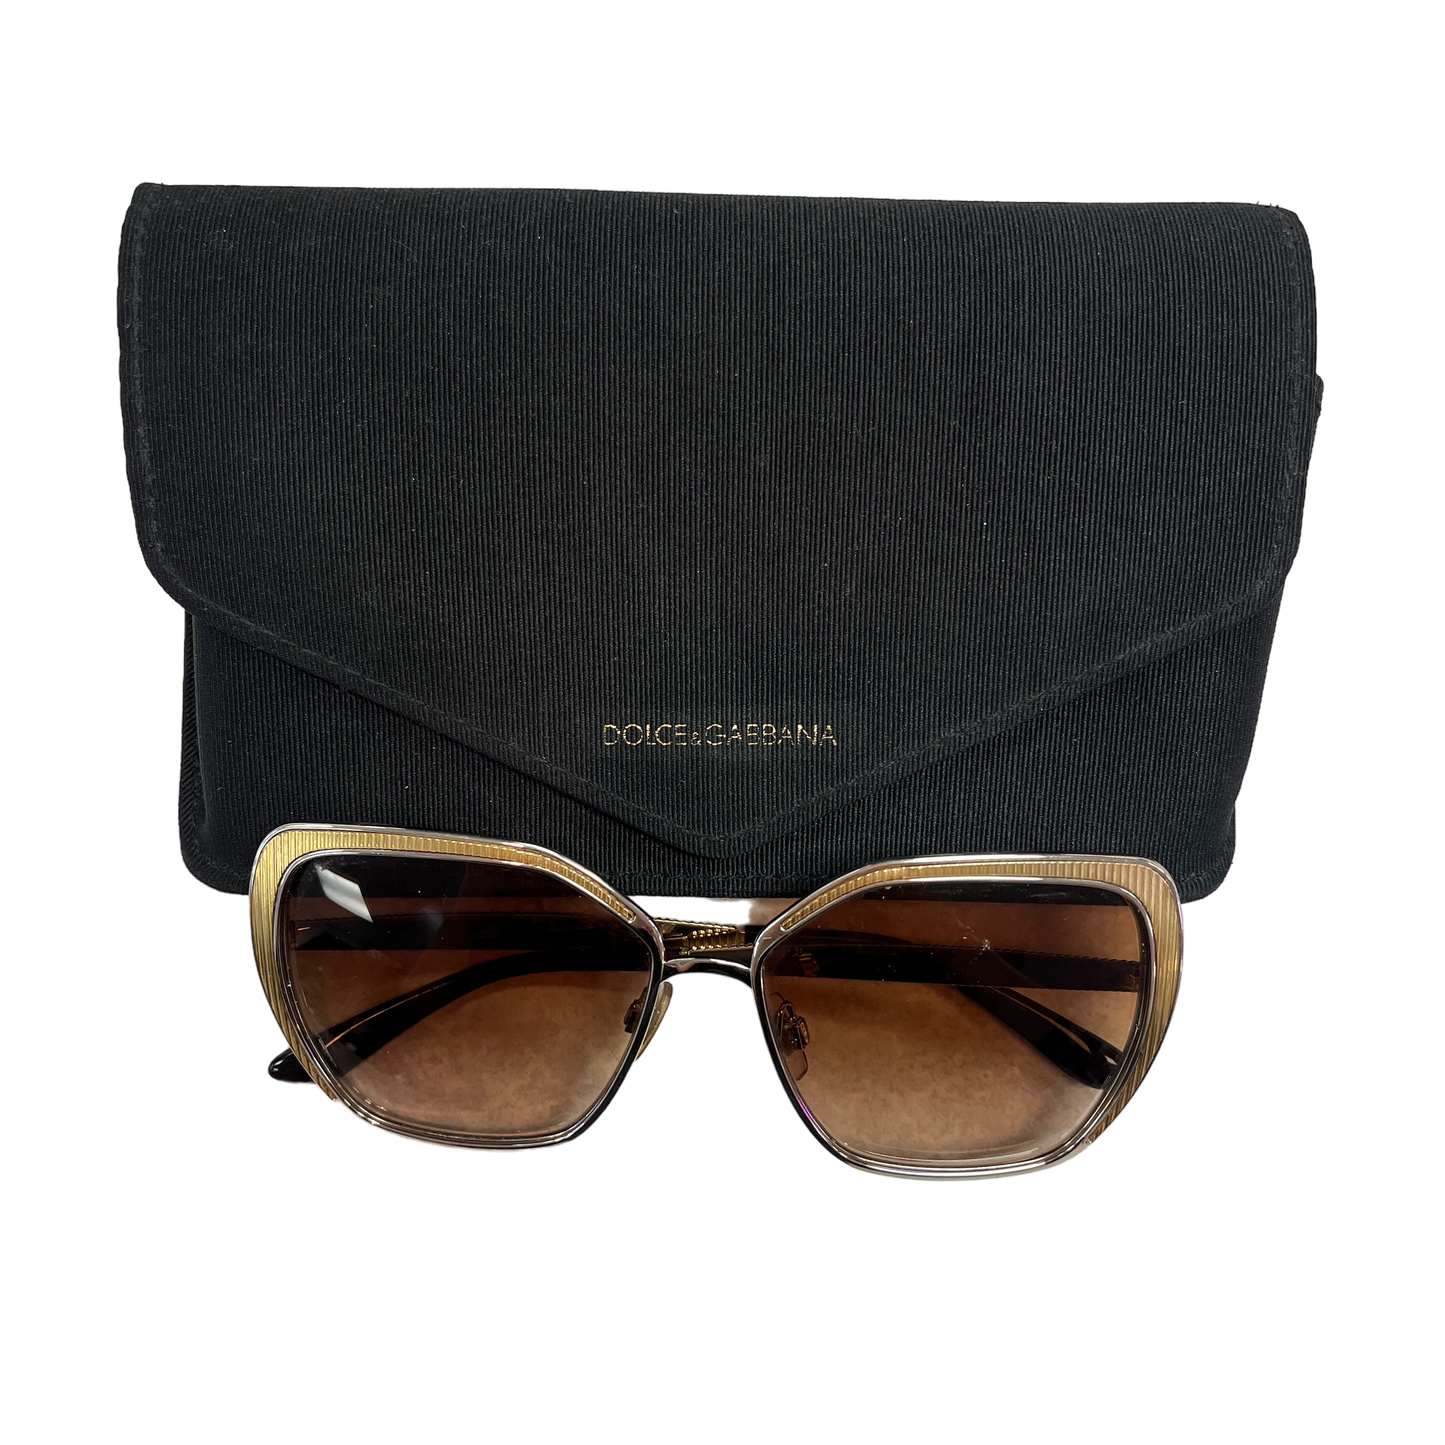 Sunglasses By Dolce And Gabbana